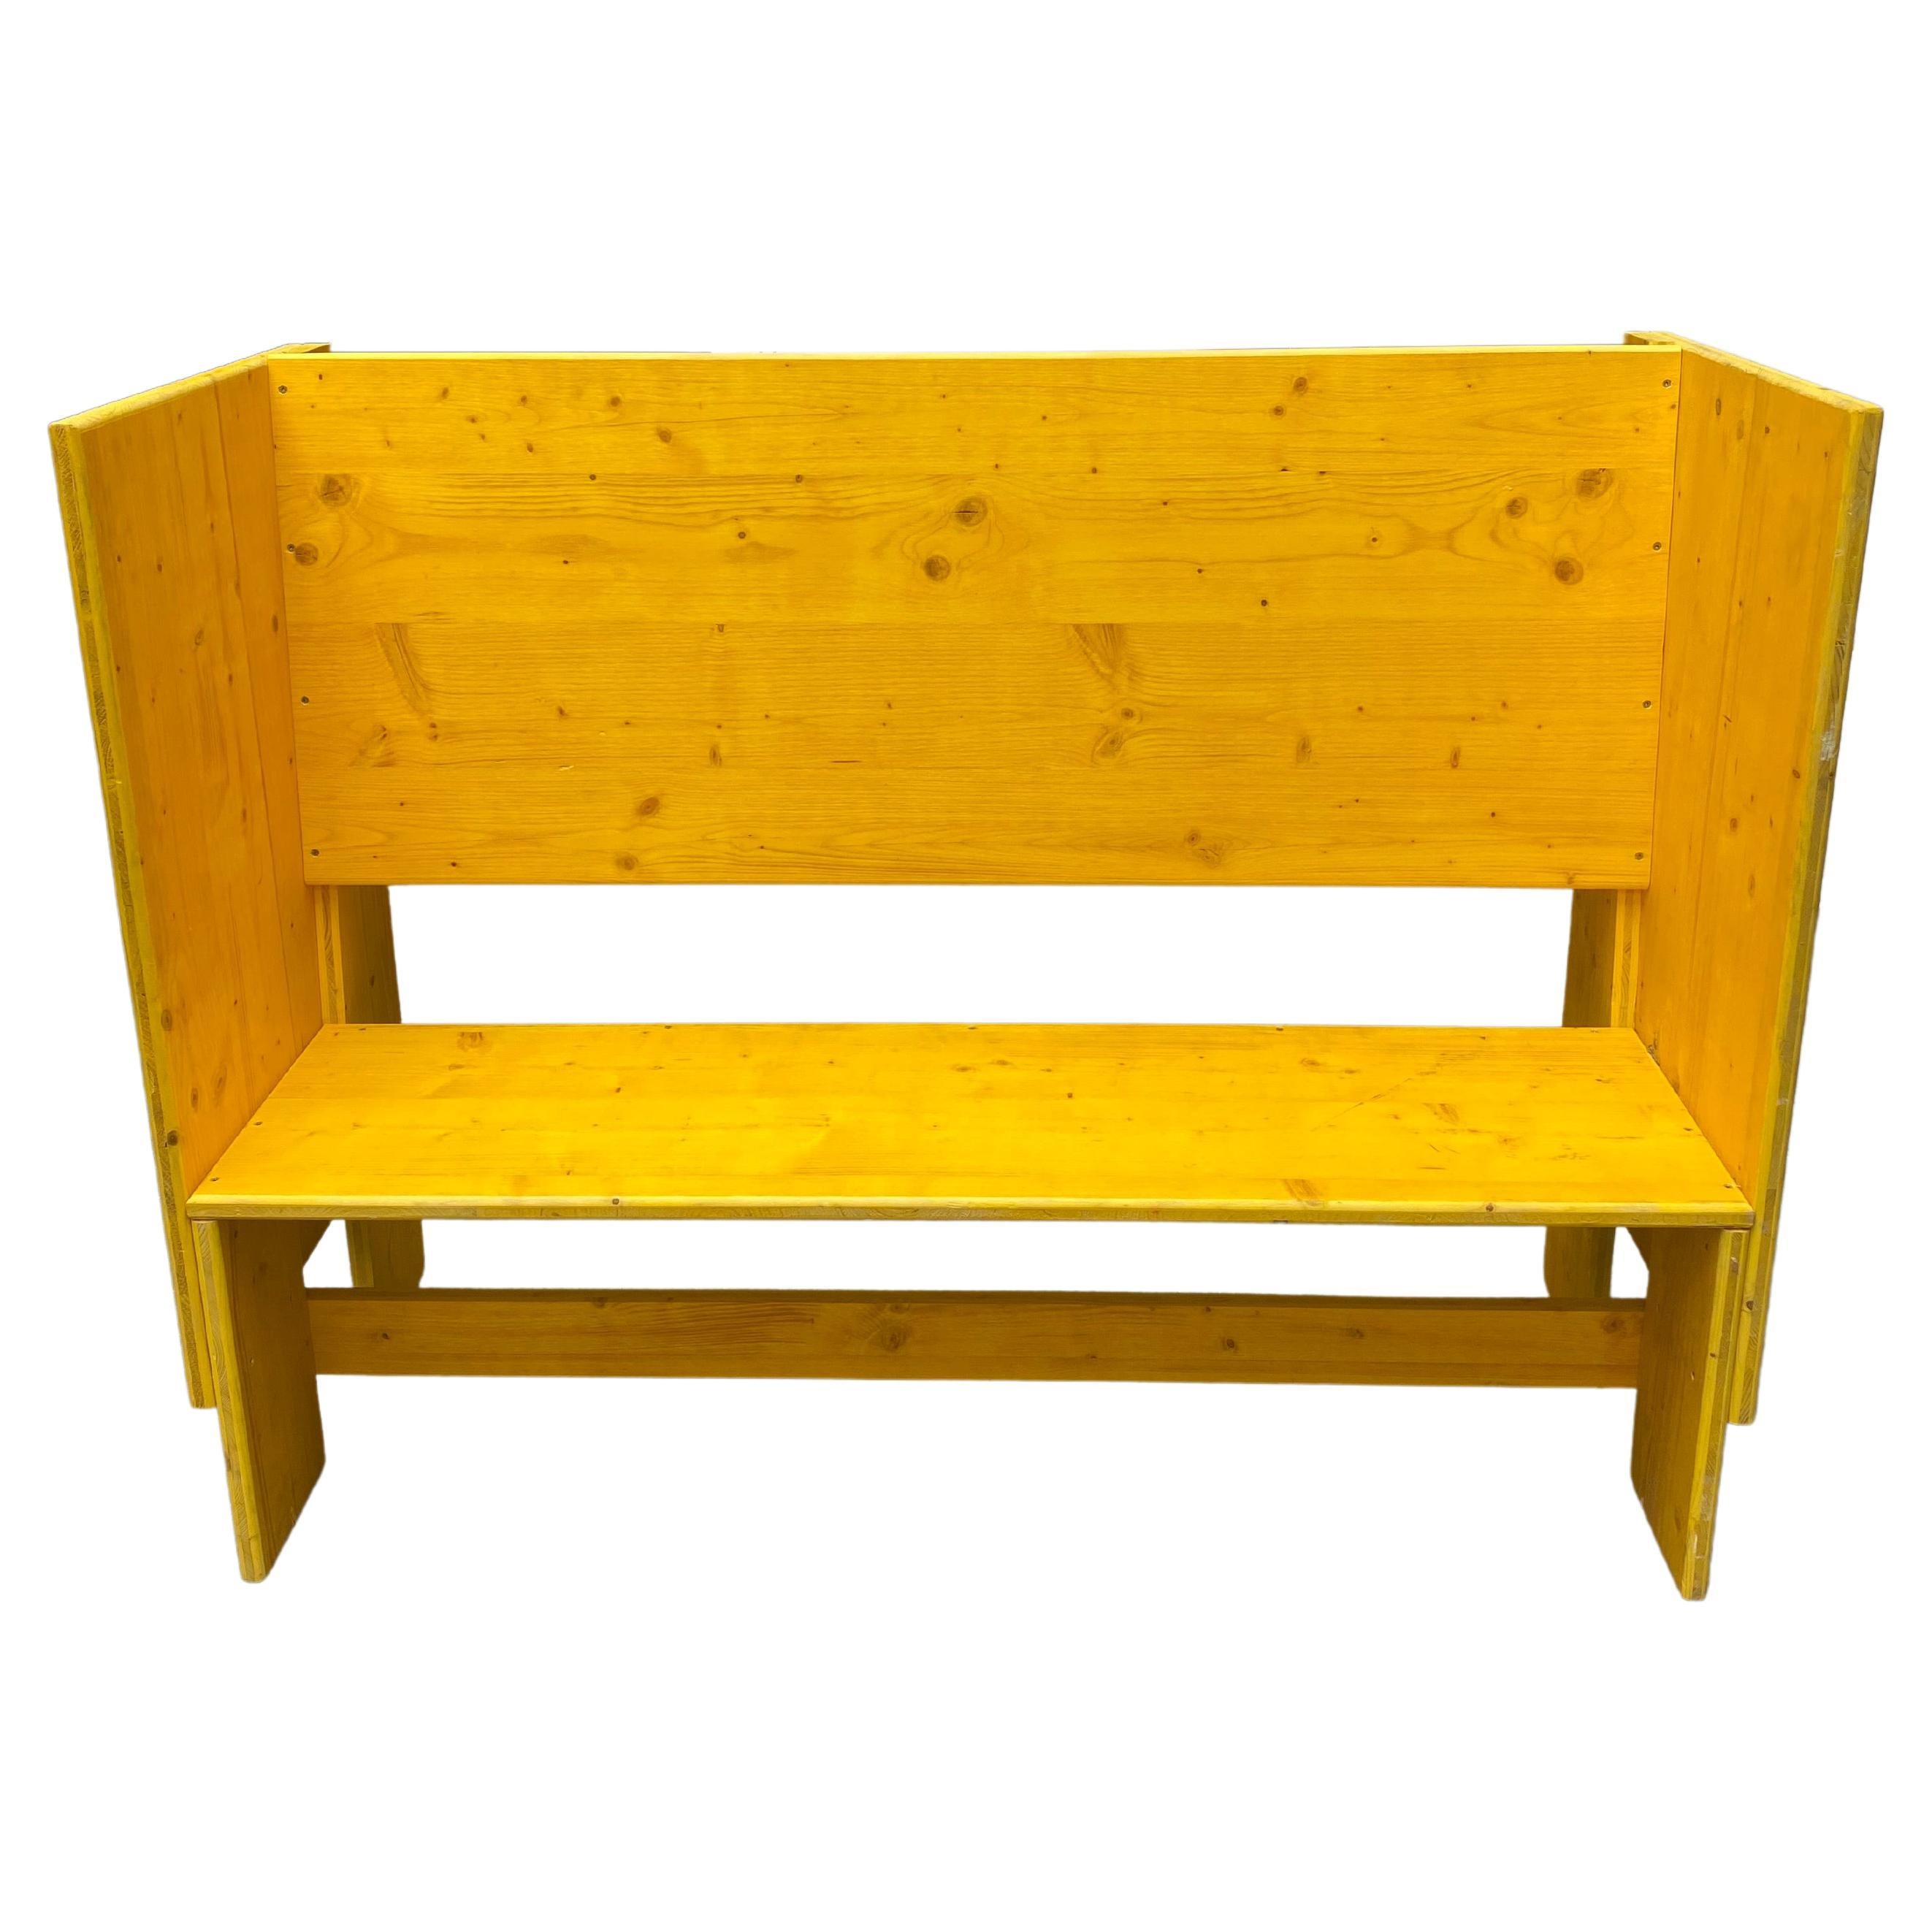 Inessa Hansch Bench Called Alcôve, circa 2010 from the Seguin Collection For Sale